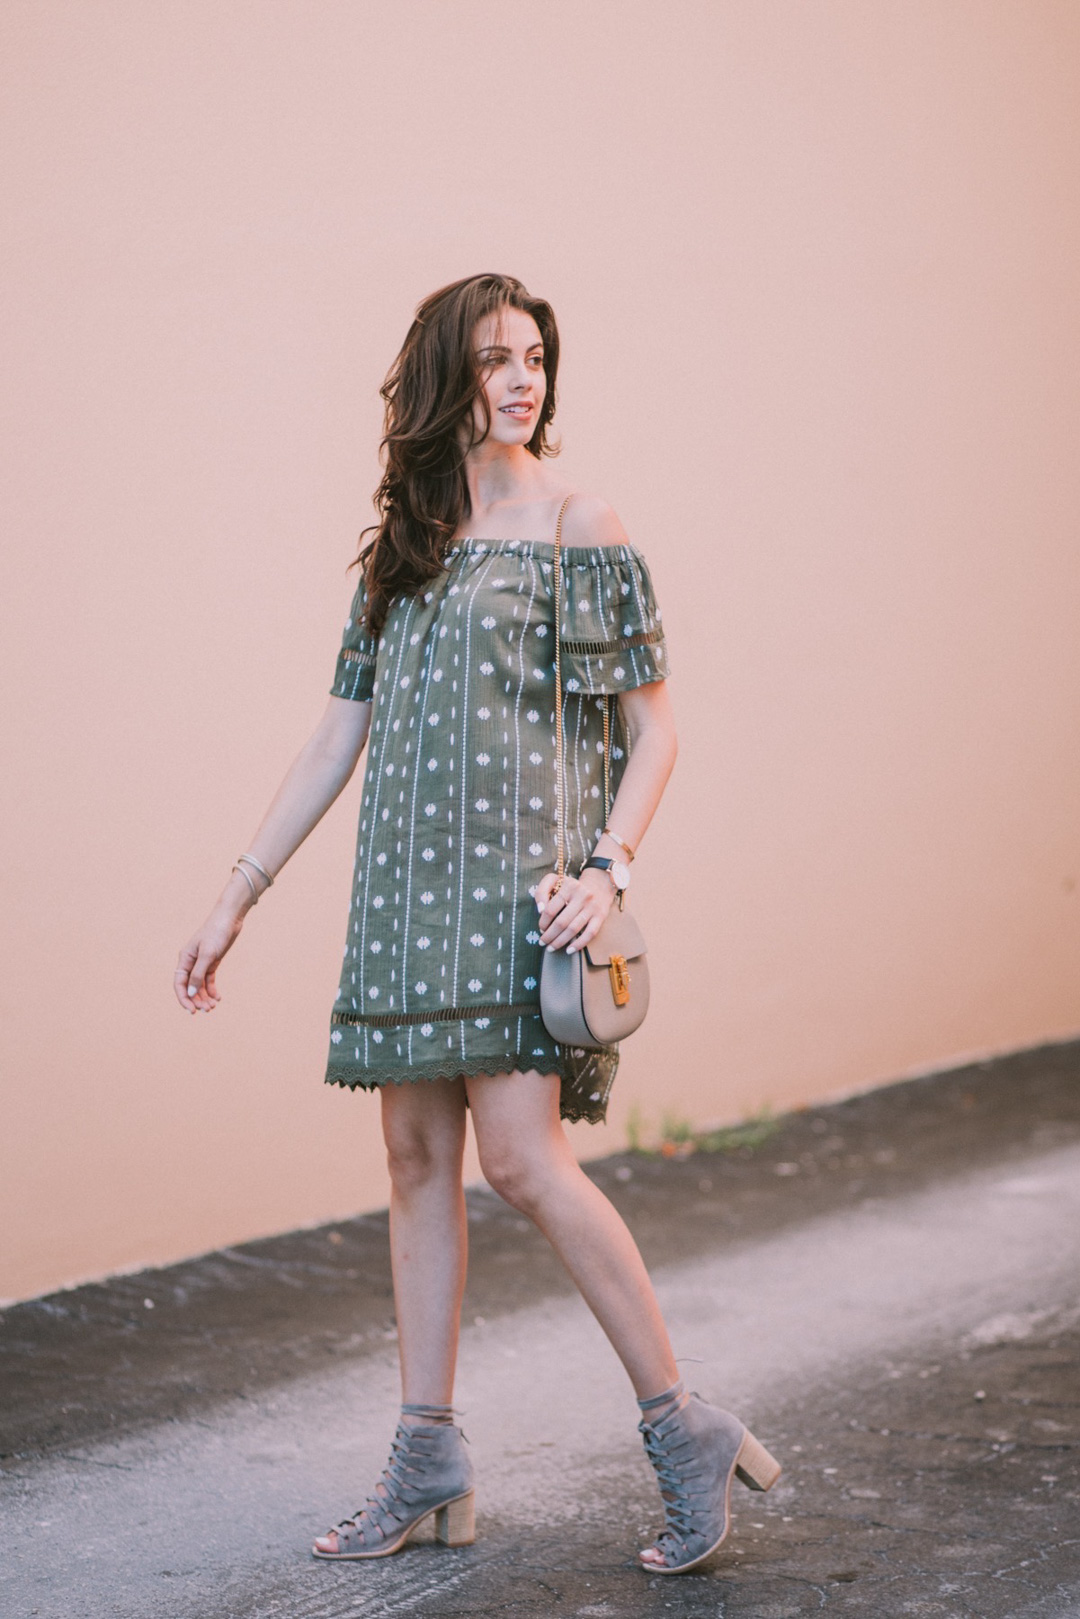 Jackie Roque styling a Topshop off the shoulder embroidered dress with Jeffery Campbell Shoes and the Chloe Drew bag